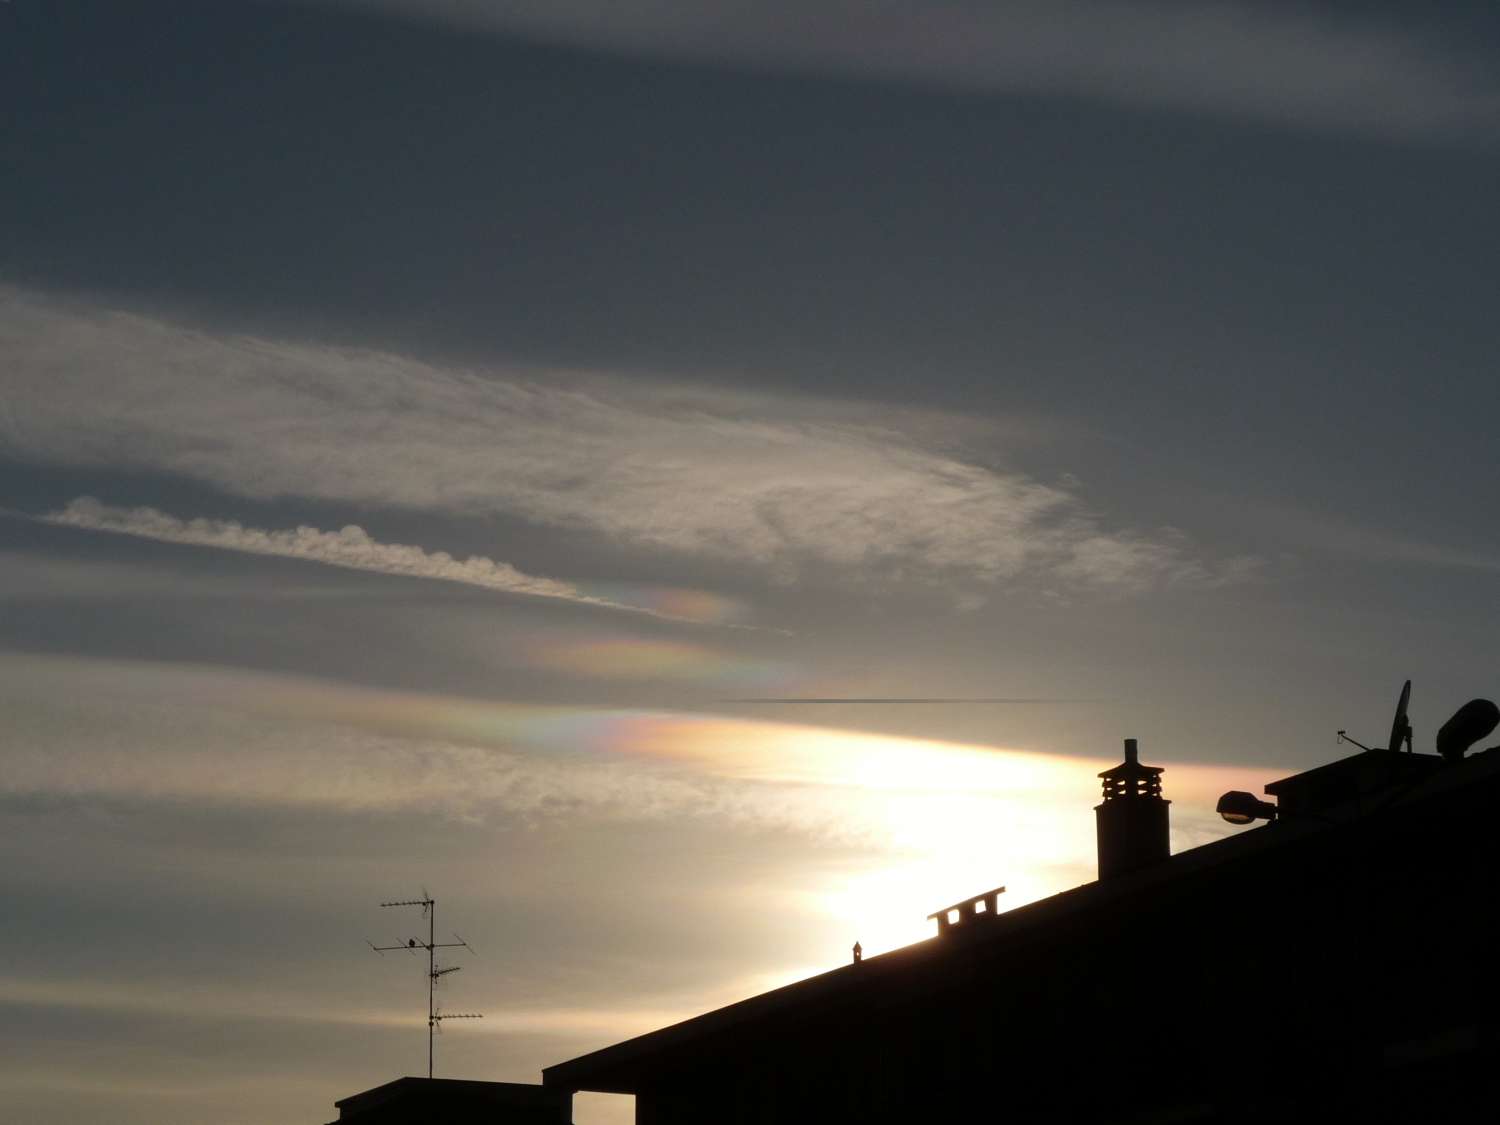 Iridescent clouds: 50 KB; click on the image to enlarge